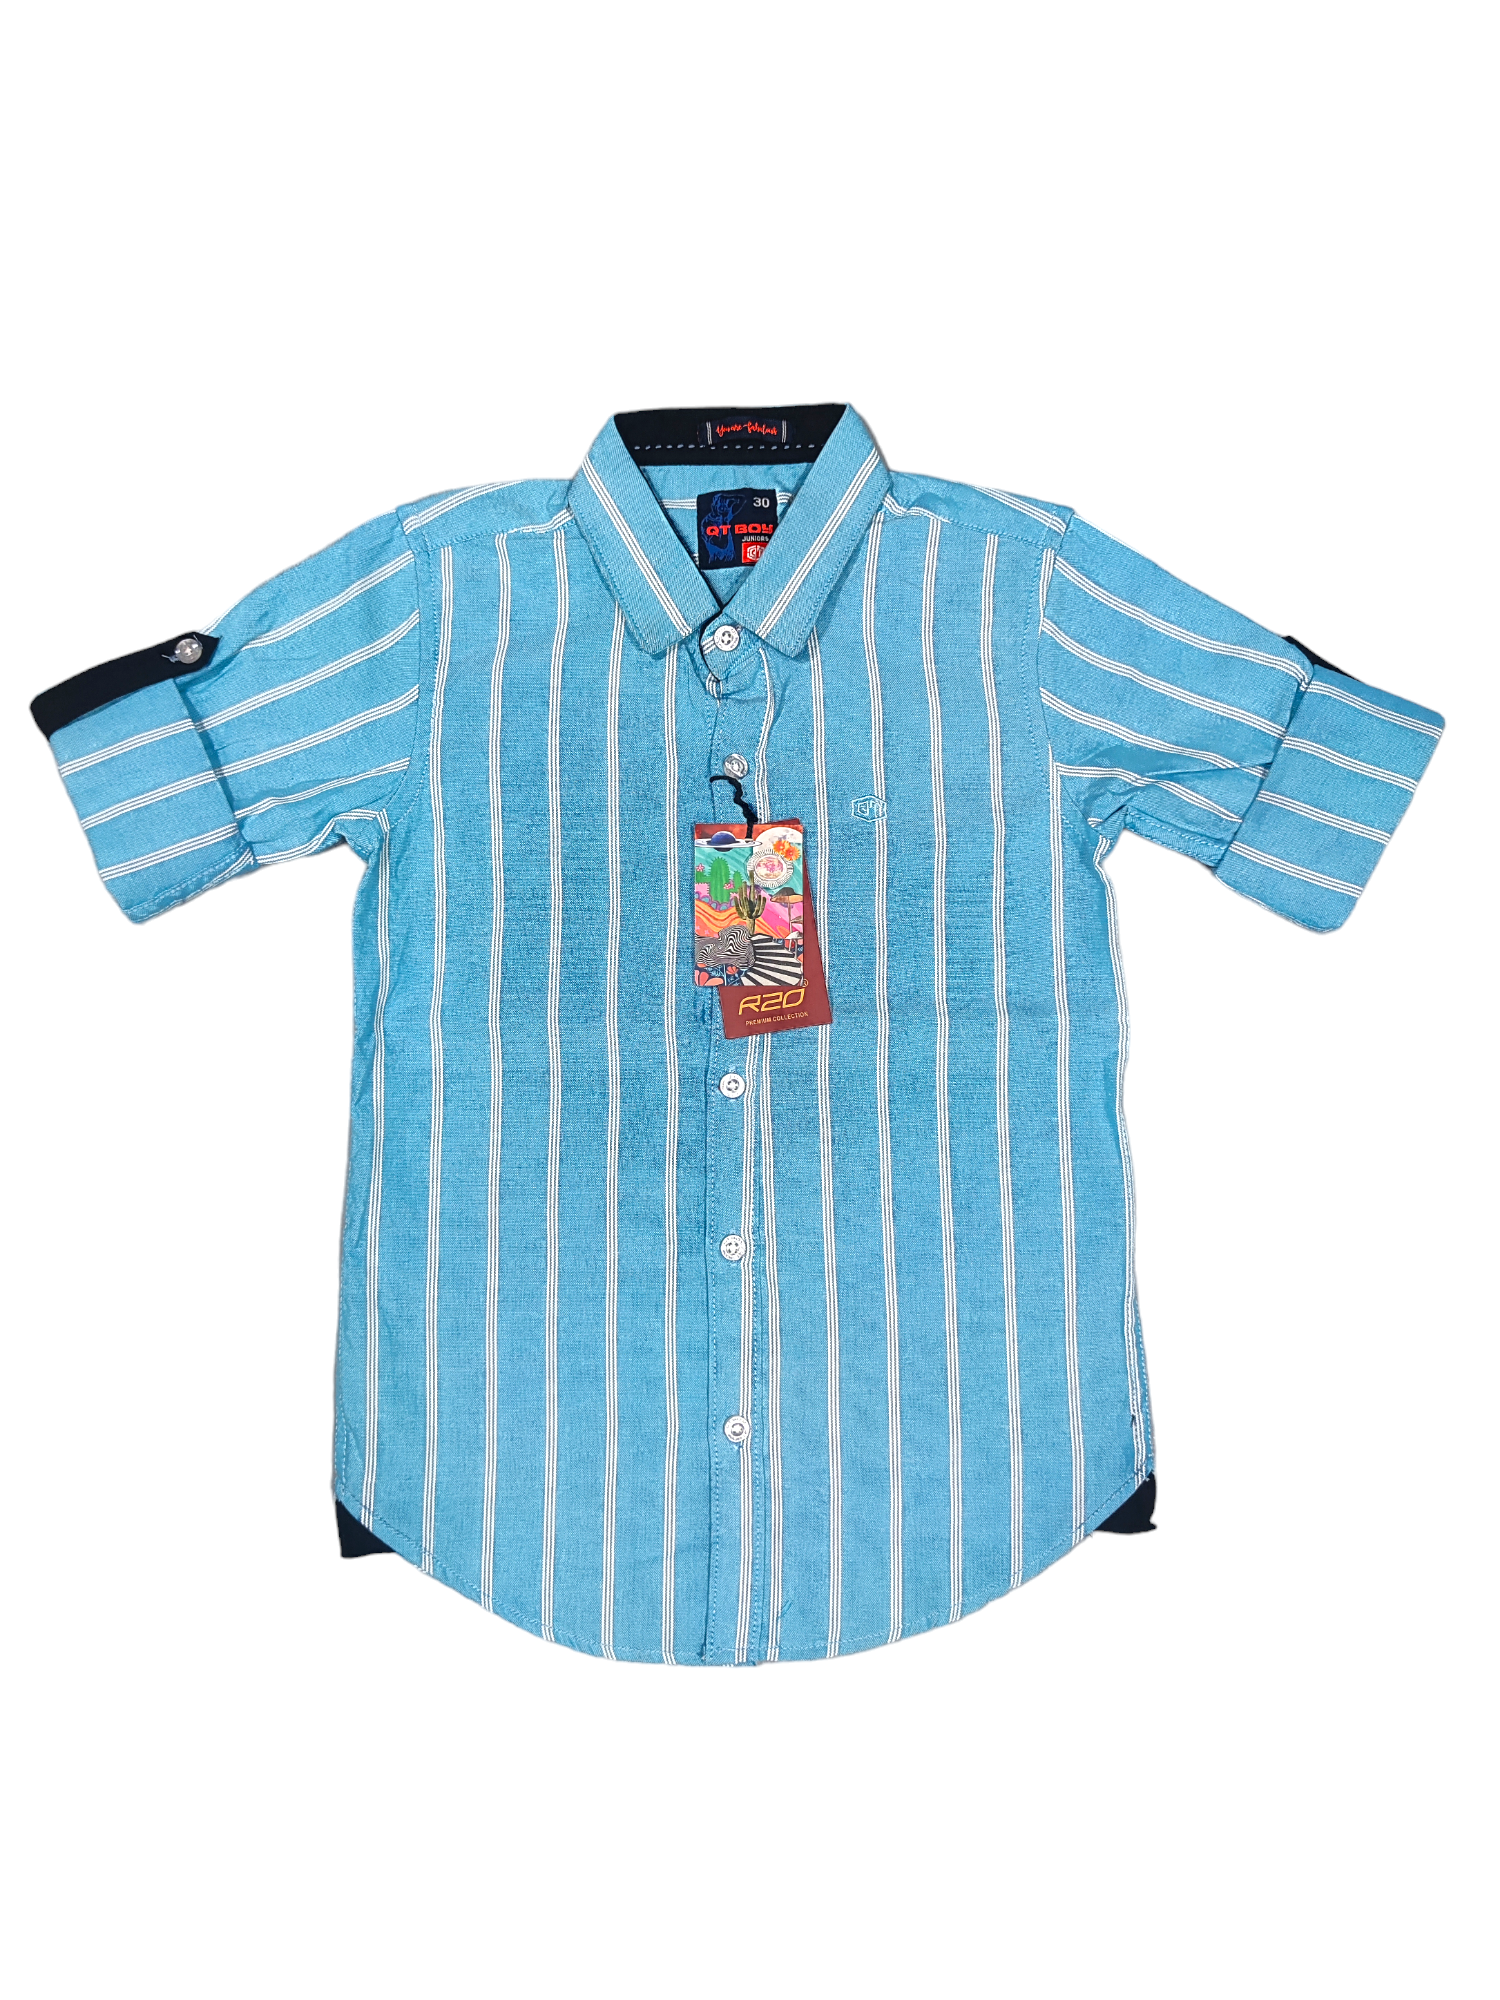 R20 Blue Checked Boys Full Sleeve Shirt / Boys Checked Shirt without Pocket